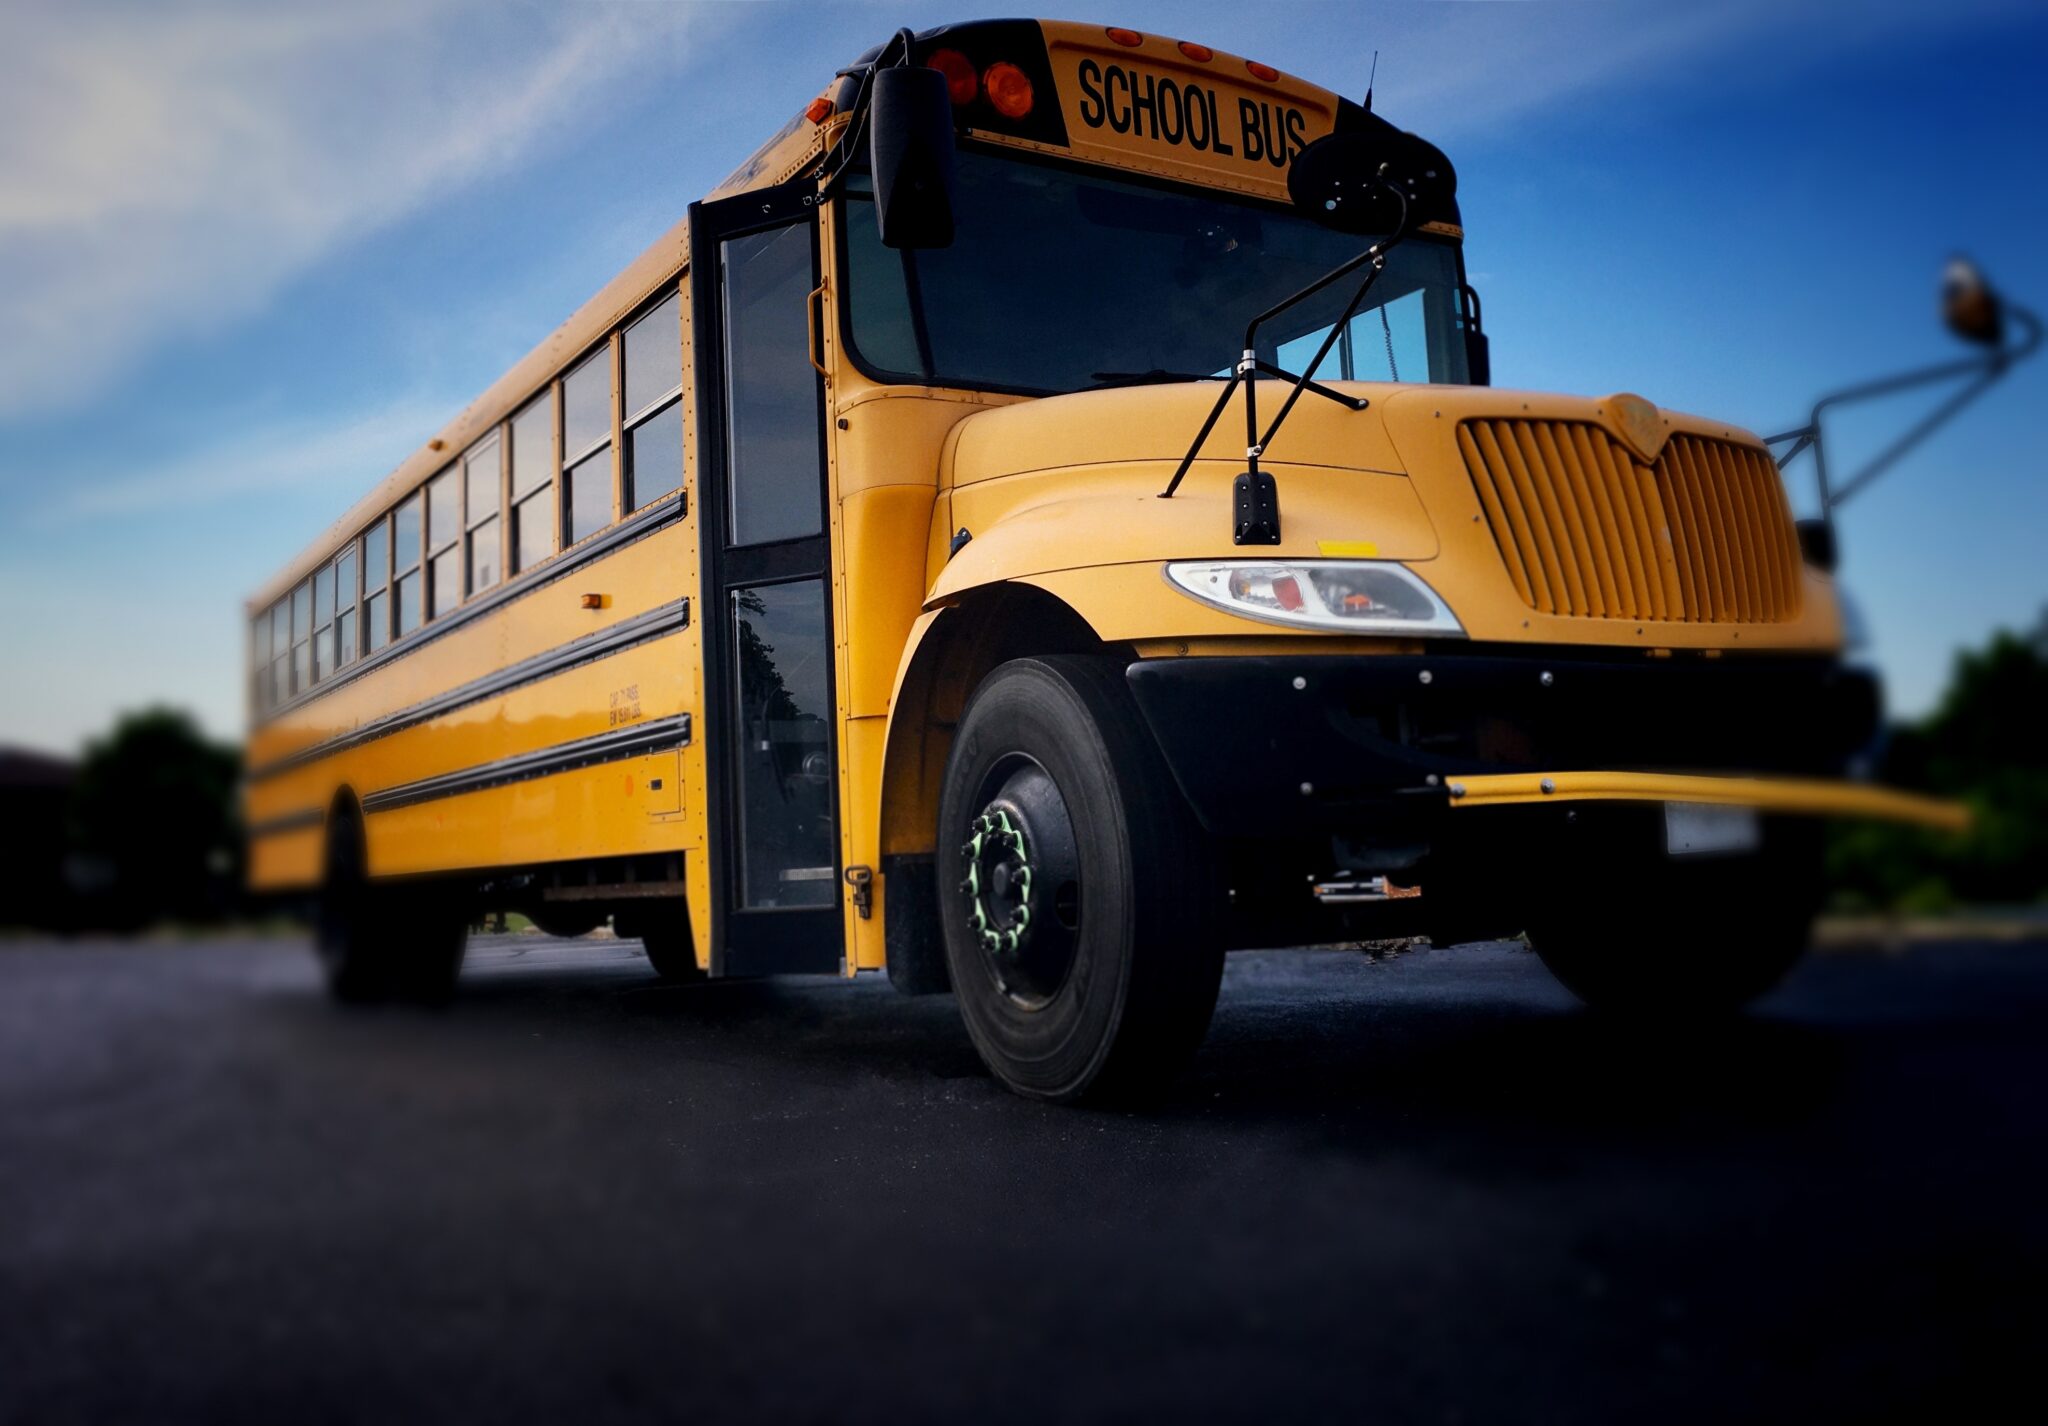 Is your child's school bus causing lower test scores?